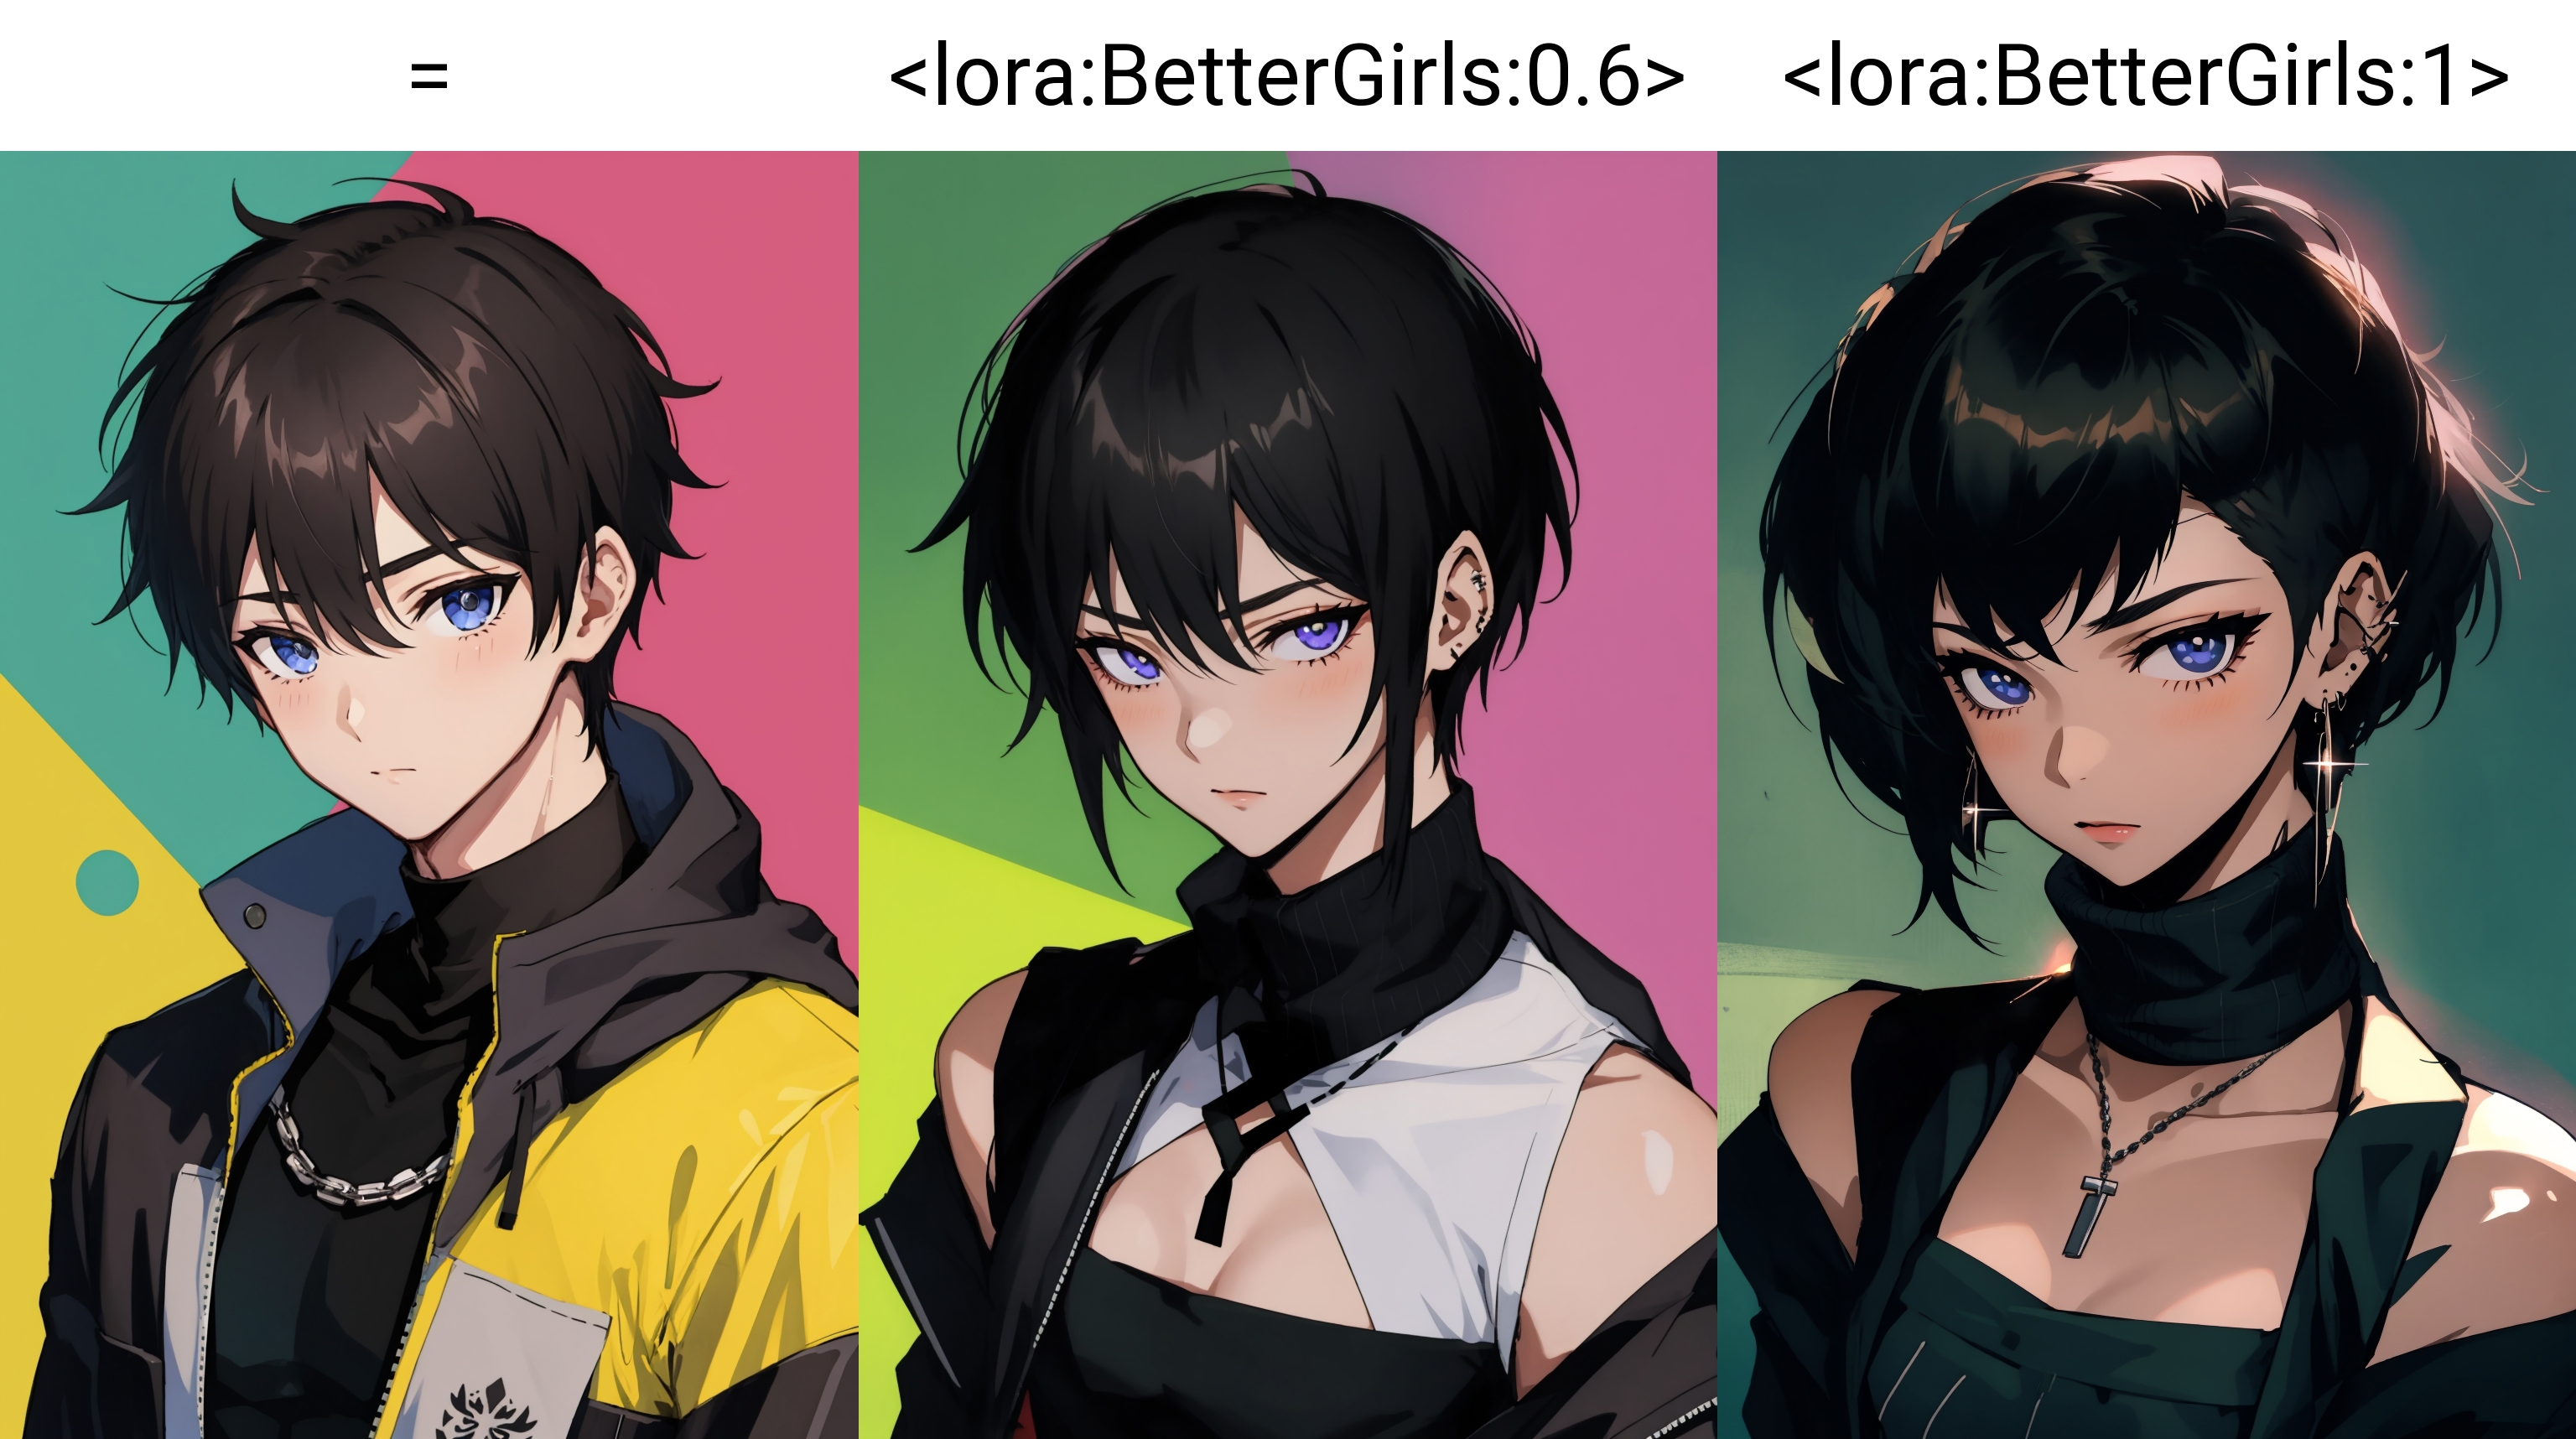 BetterGirls image by ForkY